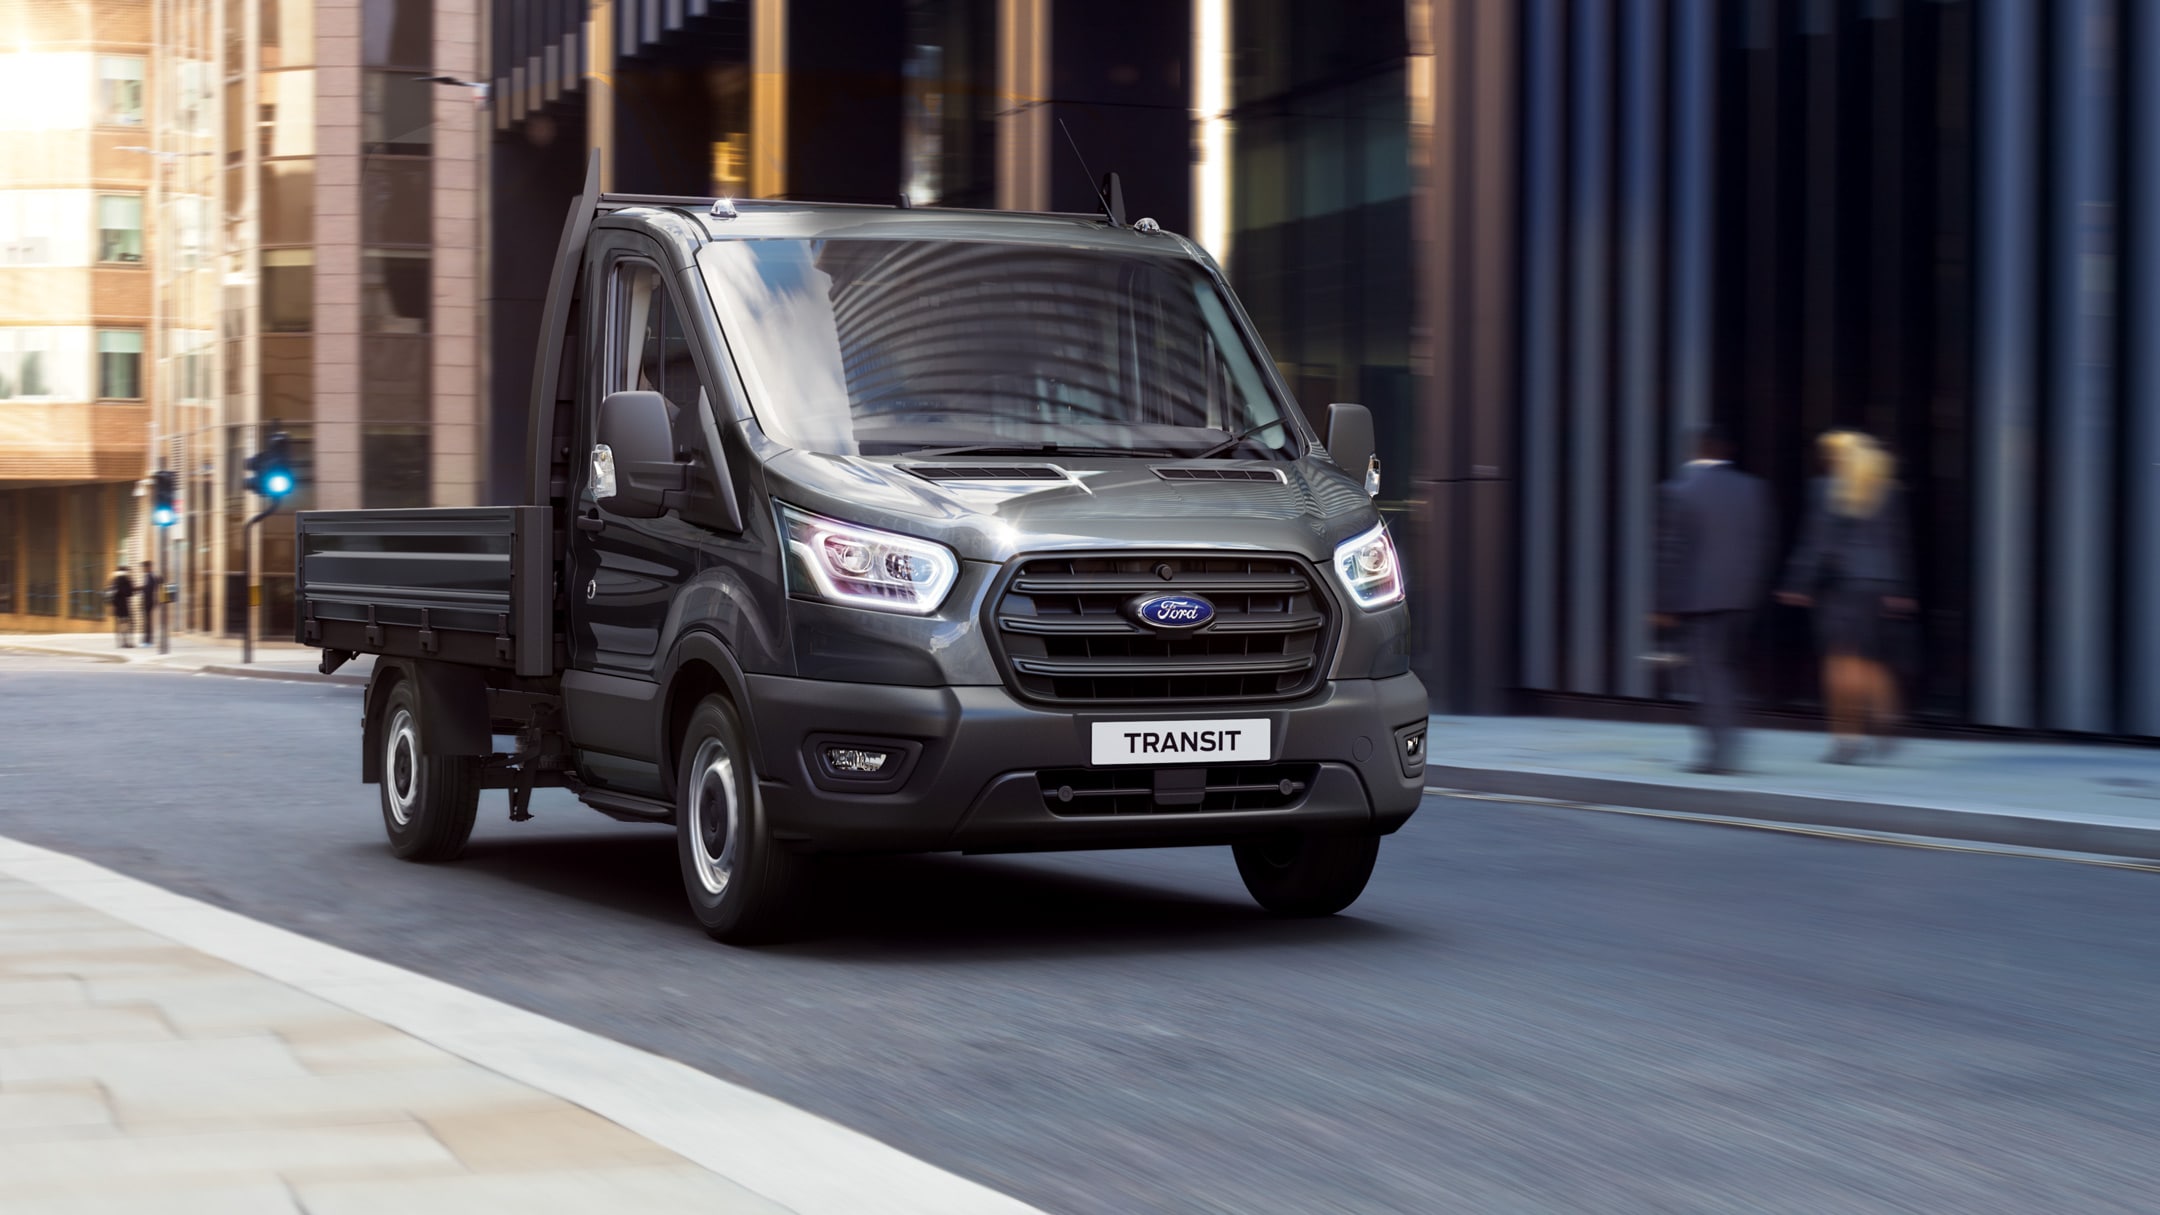 Ford Transit Chassis Cab front view